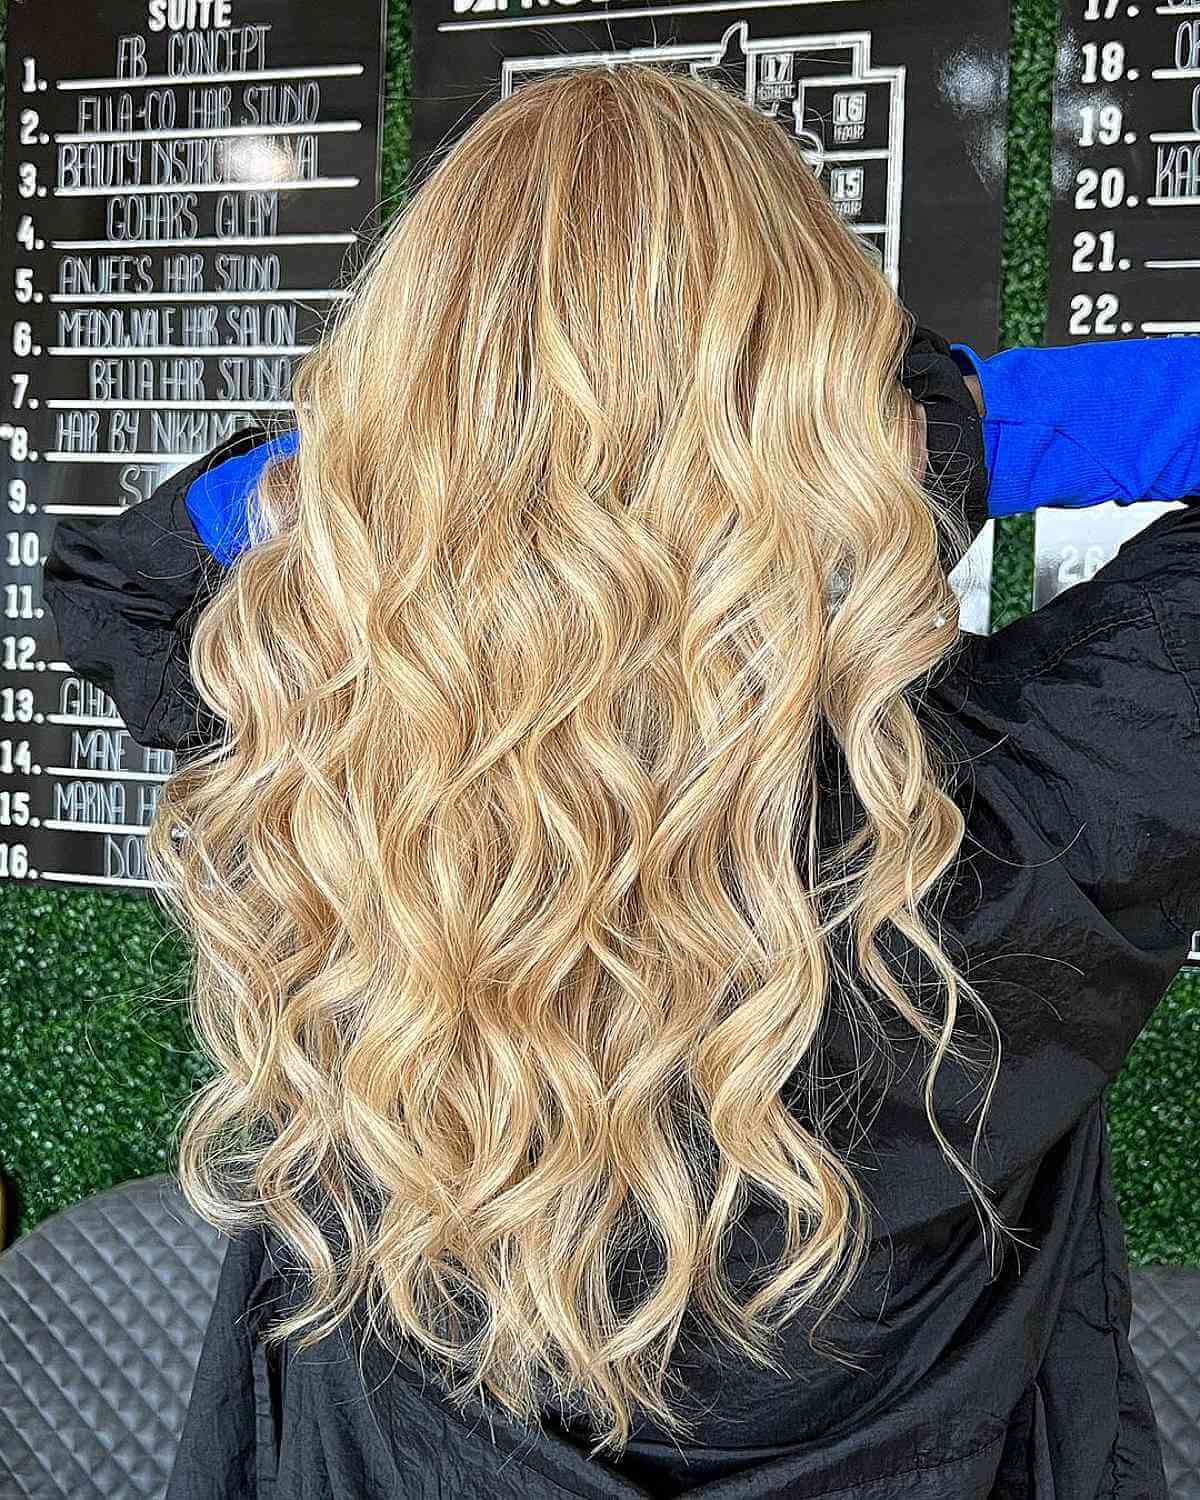 Gorgeous Long Curled Blonde Hair with Lowlights